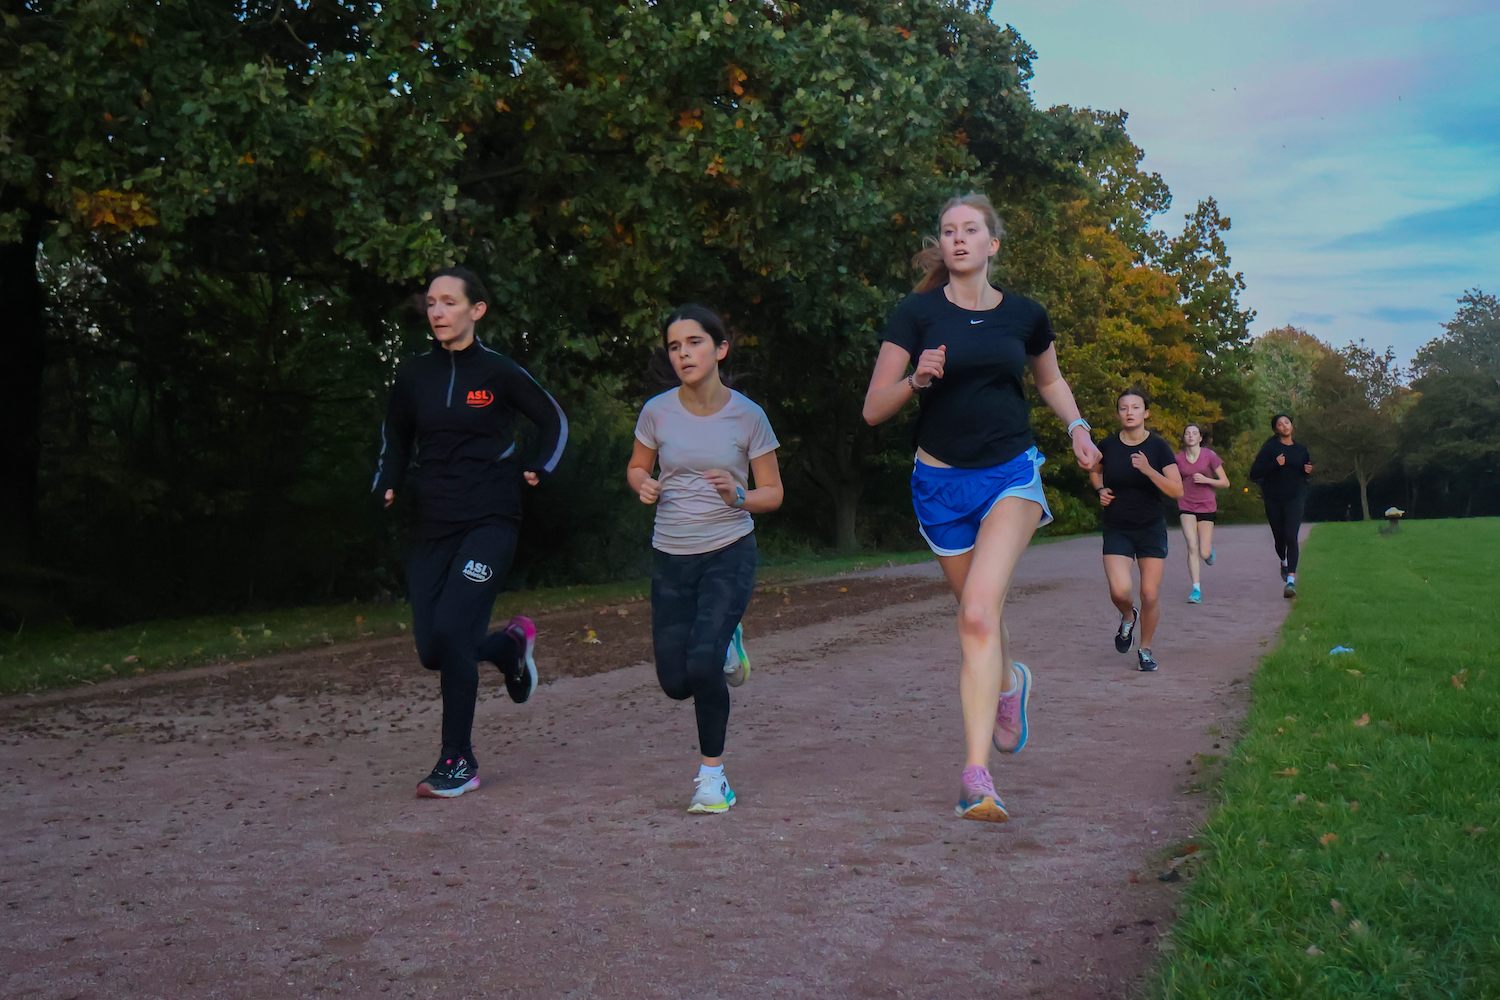 Emma Tiller (25) runs the last lap of training Nov. 6. The team ran around the Regents Park track in groups with one captain in each group.